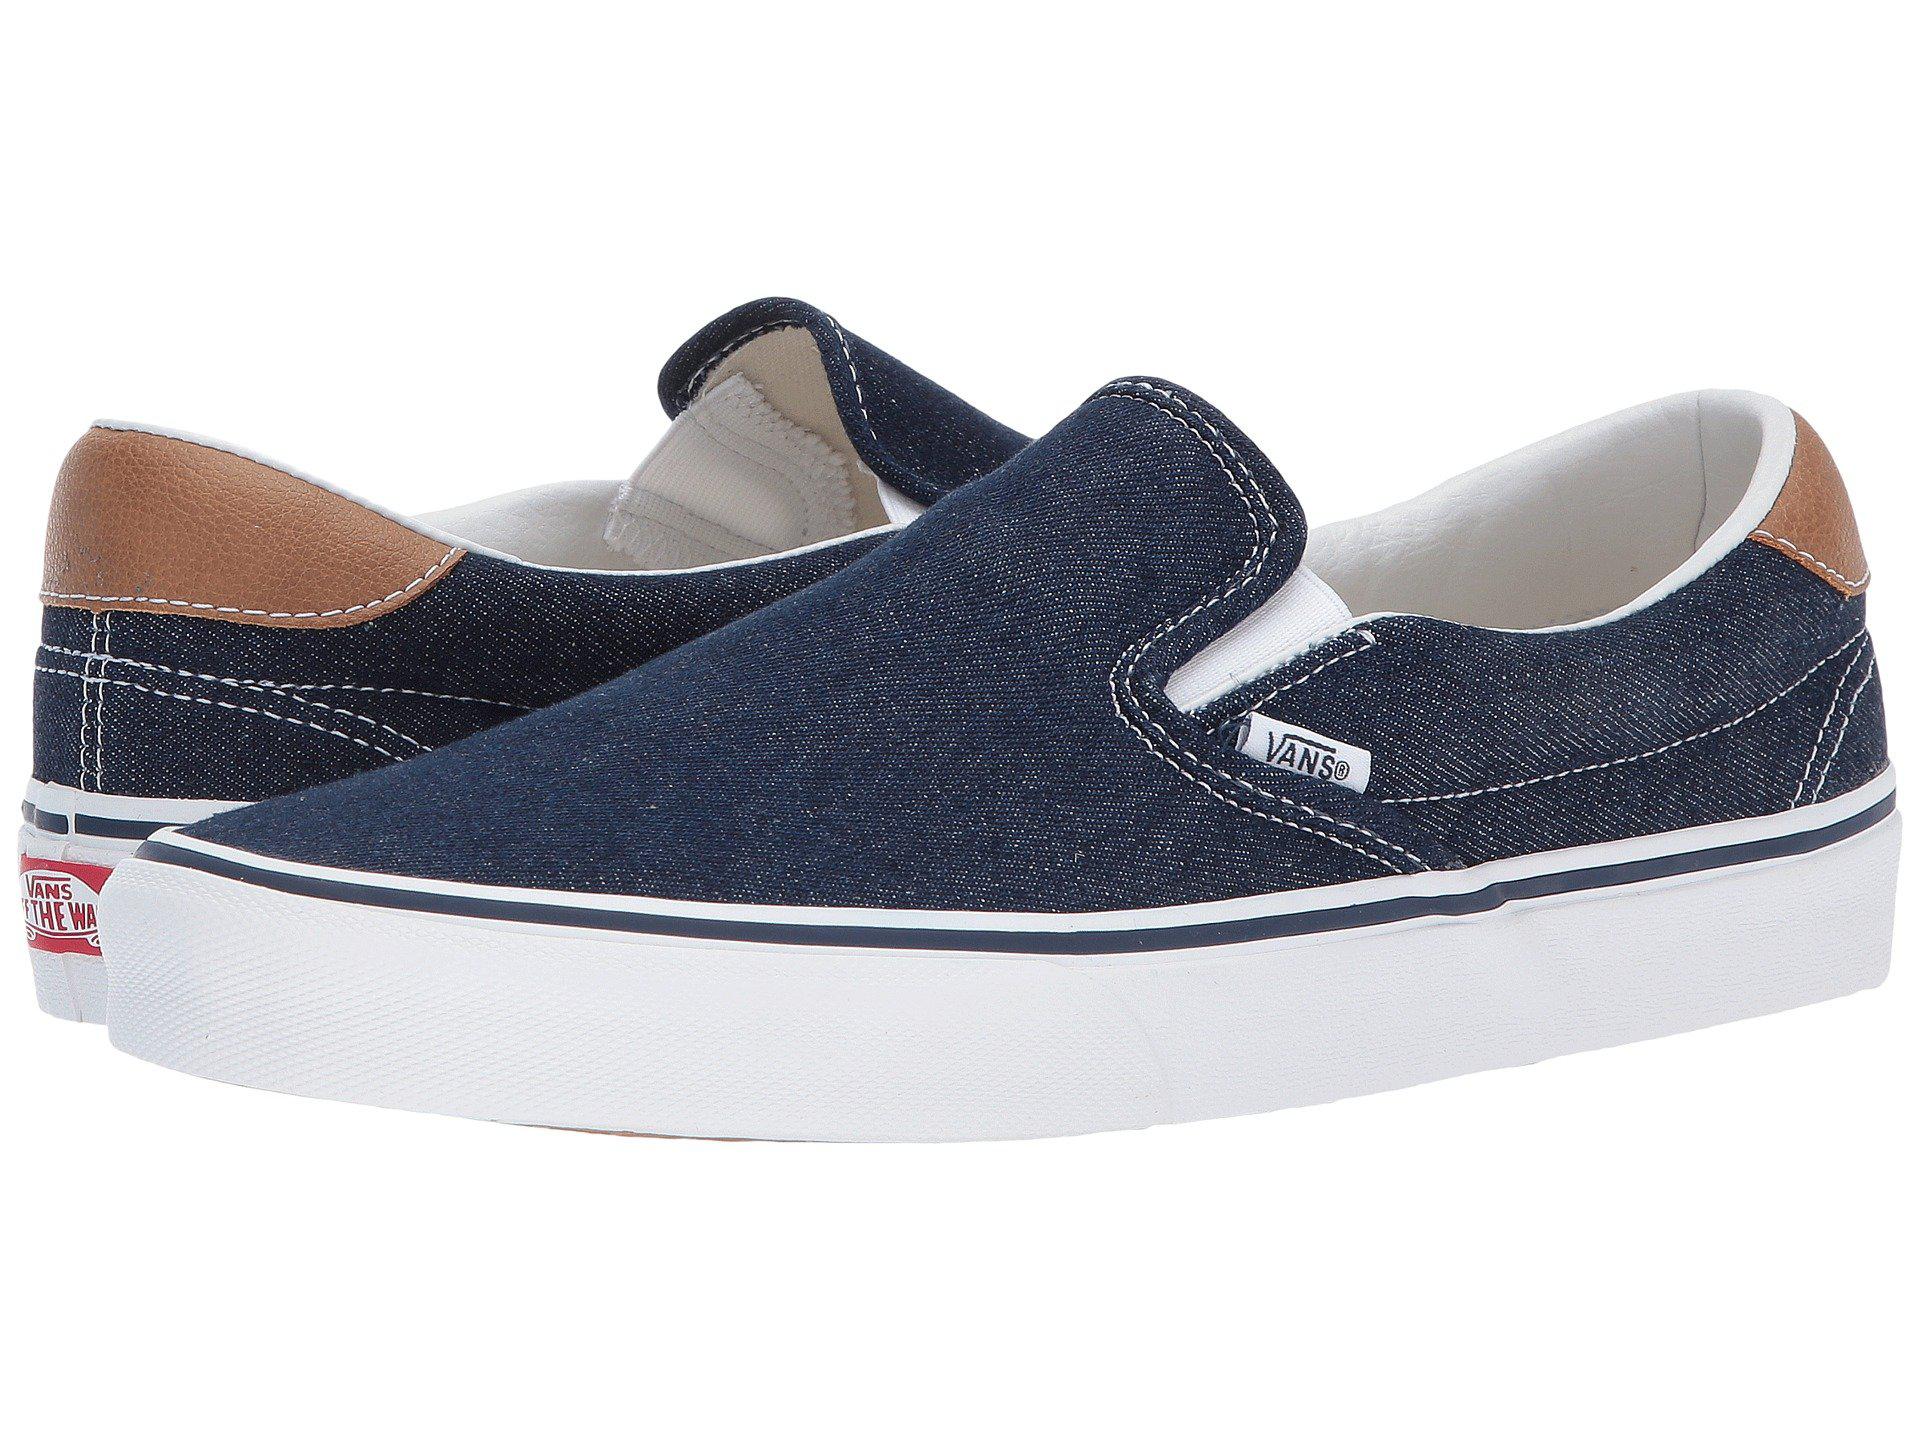 slip on vans with jeans